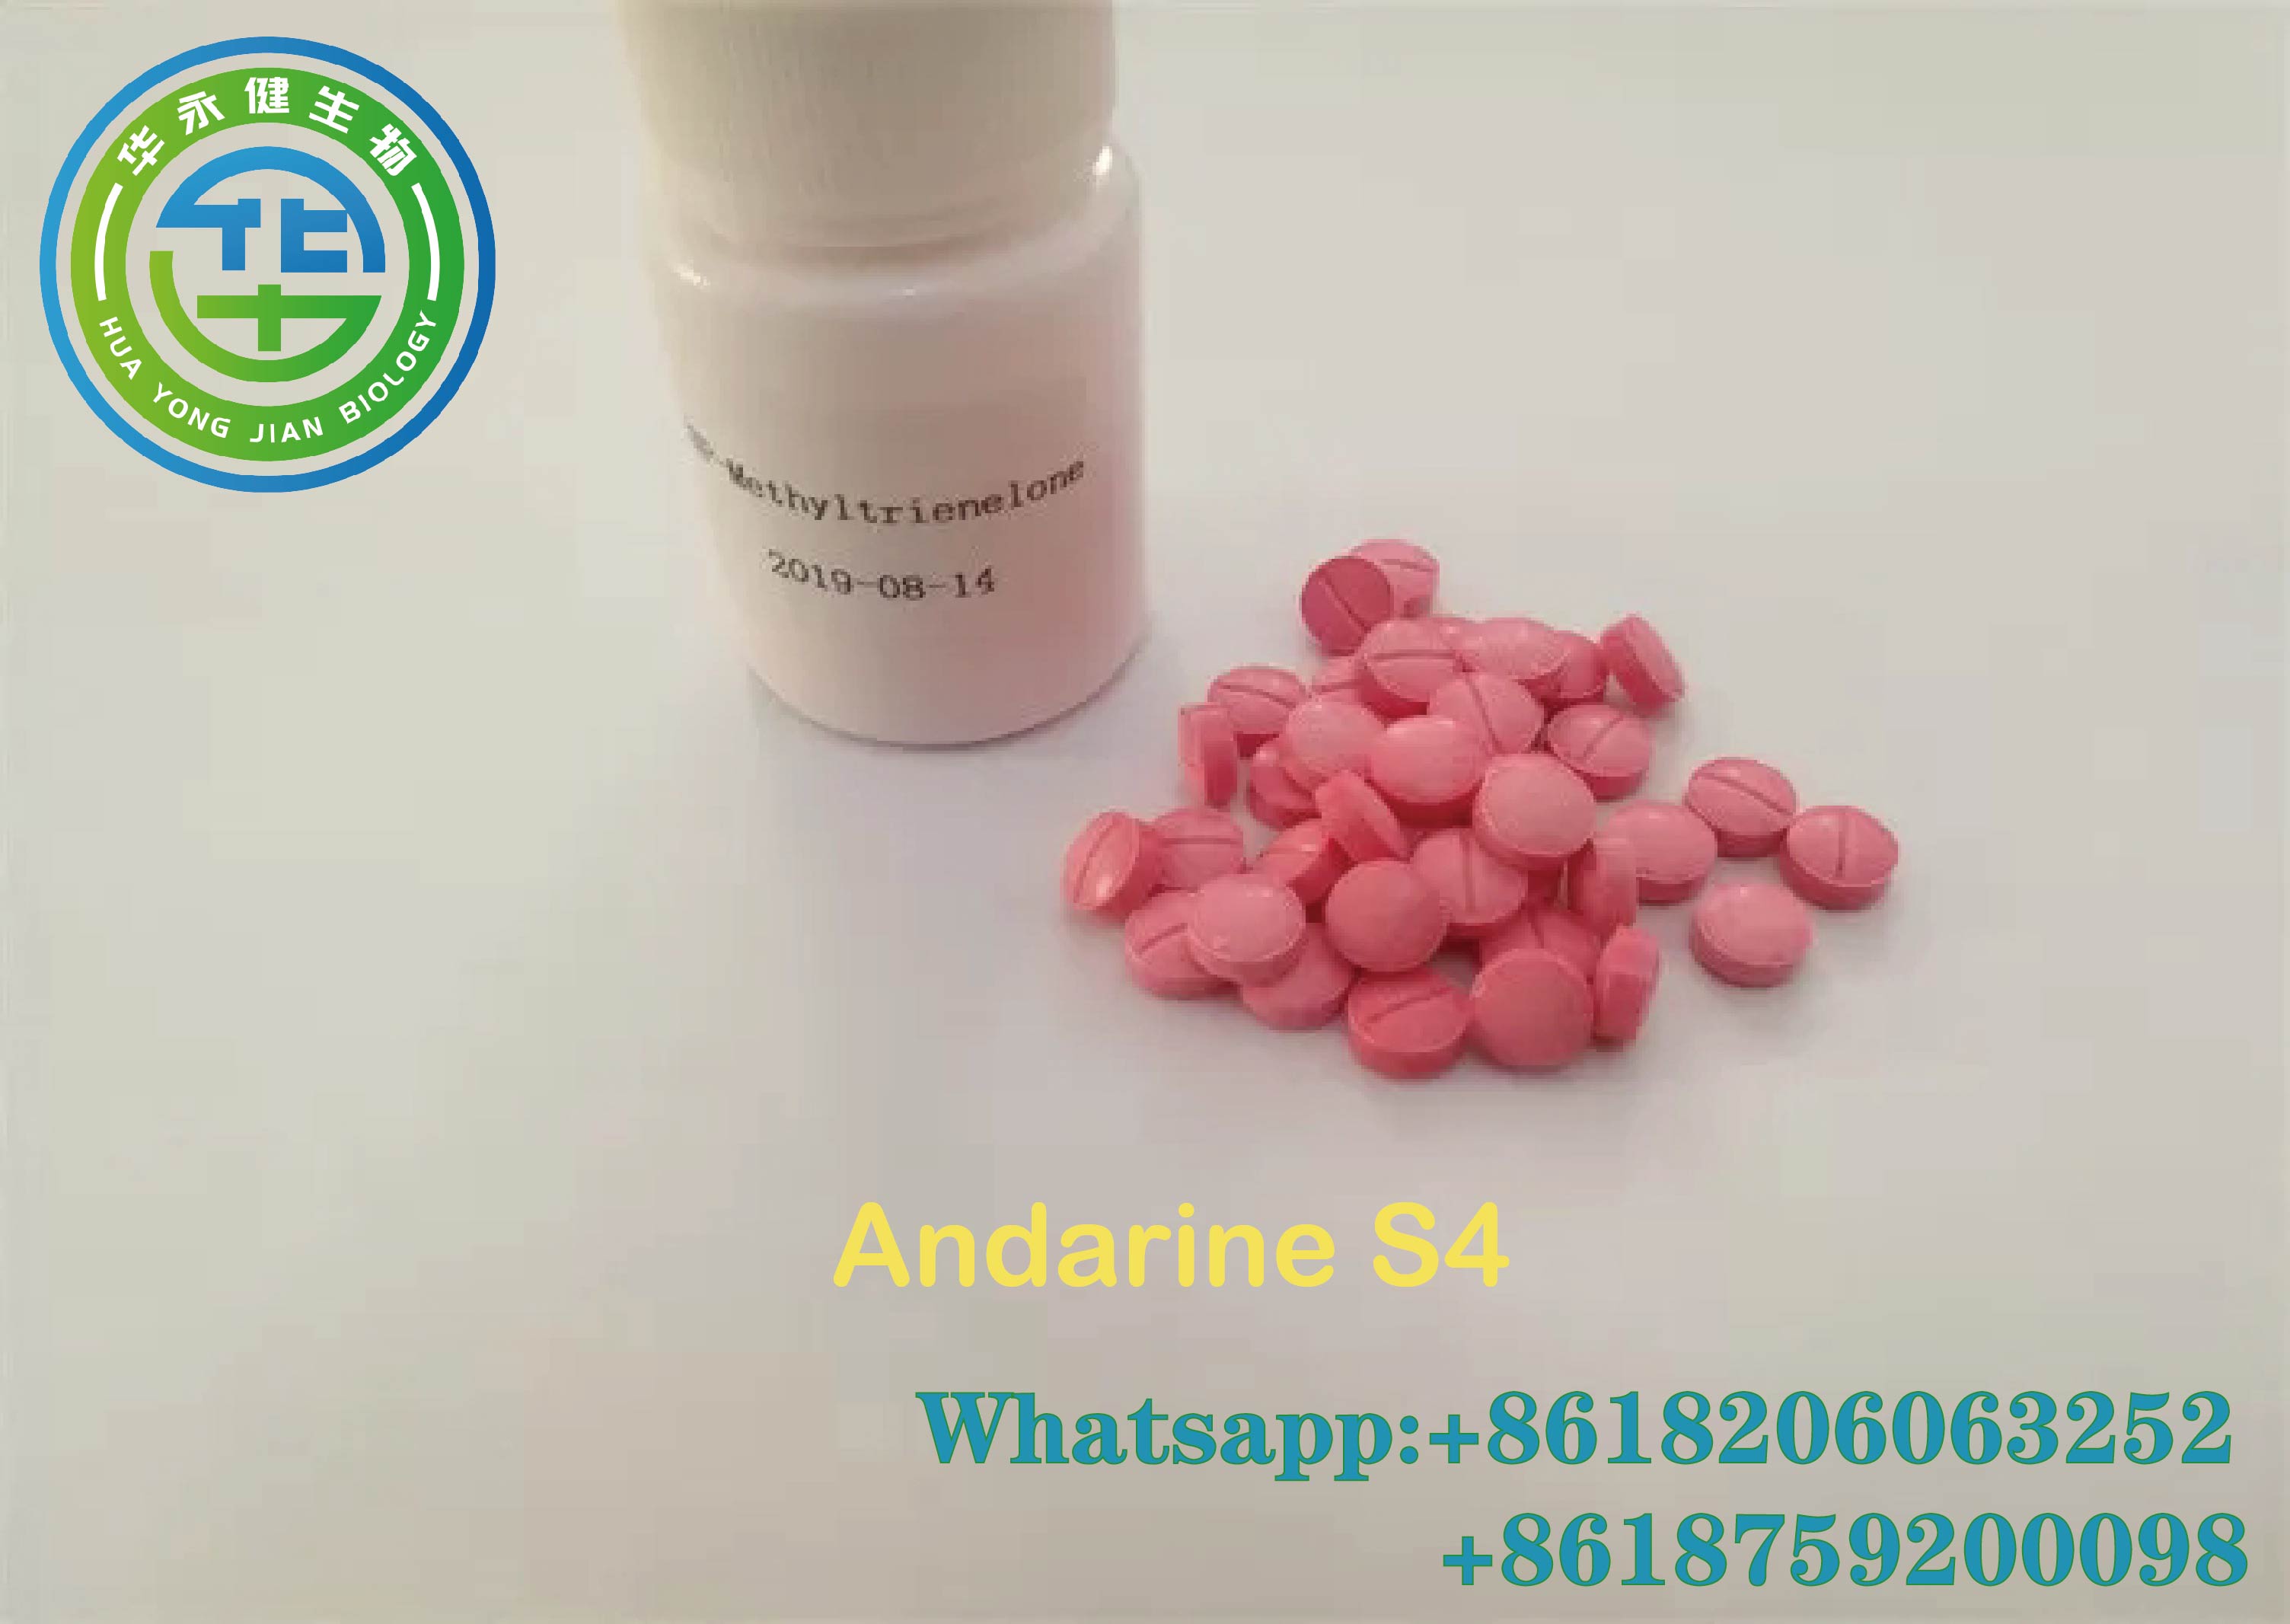  Andarine S4 100pills/bottle Raw Sarms Powder GTx-007 10mg Tablets for Male Female Burning Fat CAS 401900-40-1